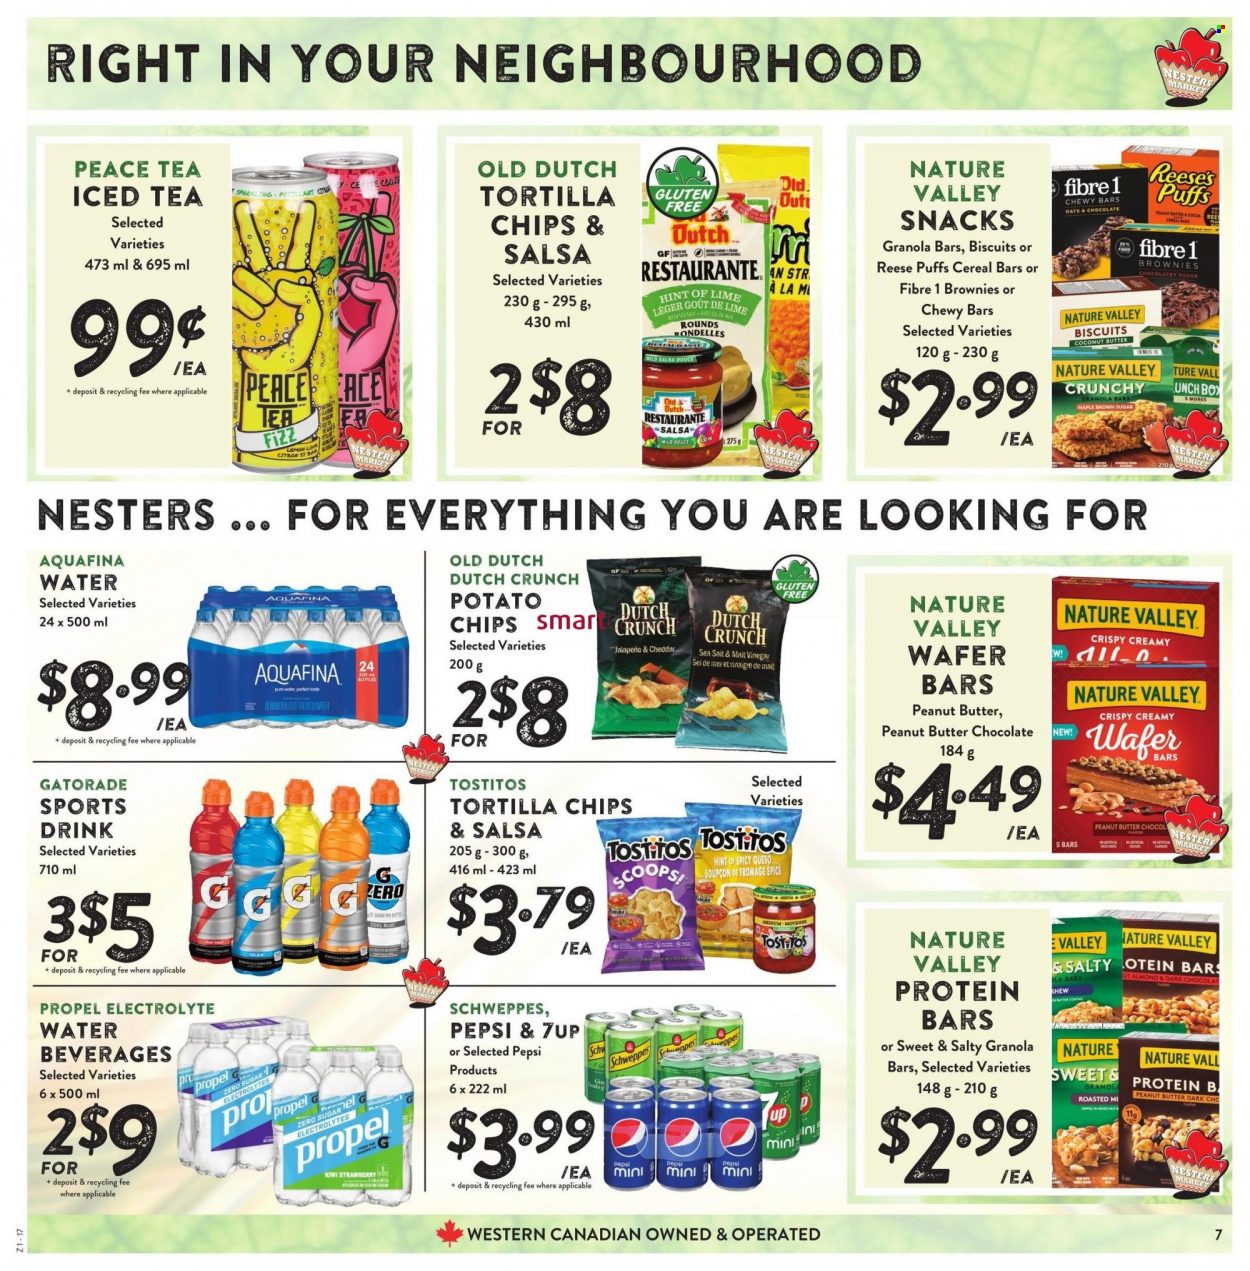 Nesters Food Market Flyer - November 20, 2022 - November 26, 2022 - Sales products - Puffs, brownies, jalapeño, coconut, cheese, Reese's, Fudge, wafers, chocolate, snack, cereal bar, biscuit, tortilla chips, chips, Tostitos, cane sugar, cocoa, cereals, protein bar, granola bar, Nature Valley, salsa, peanut butter, Schweppes, Pepsi, ice tea, 7UP, Gatorade, Aquafina, purified water, gin, kiwi. Page 7.